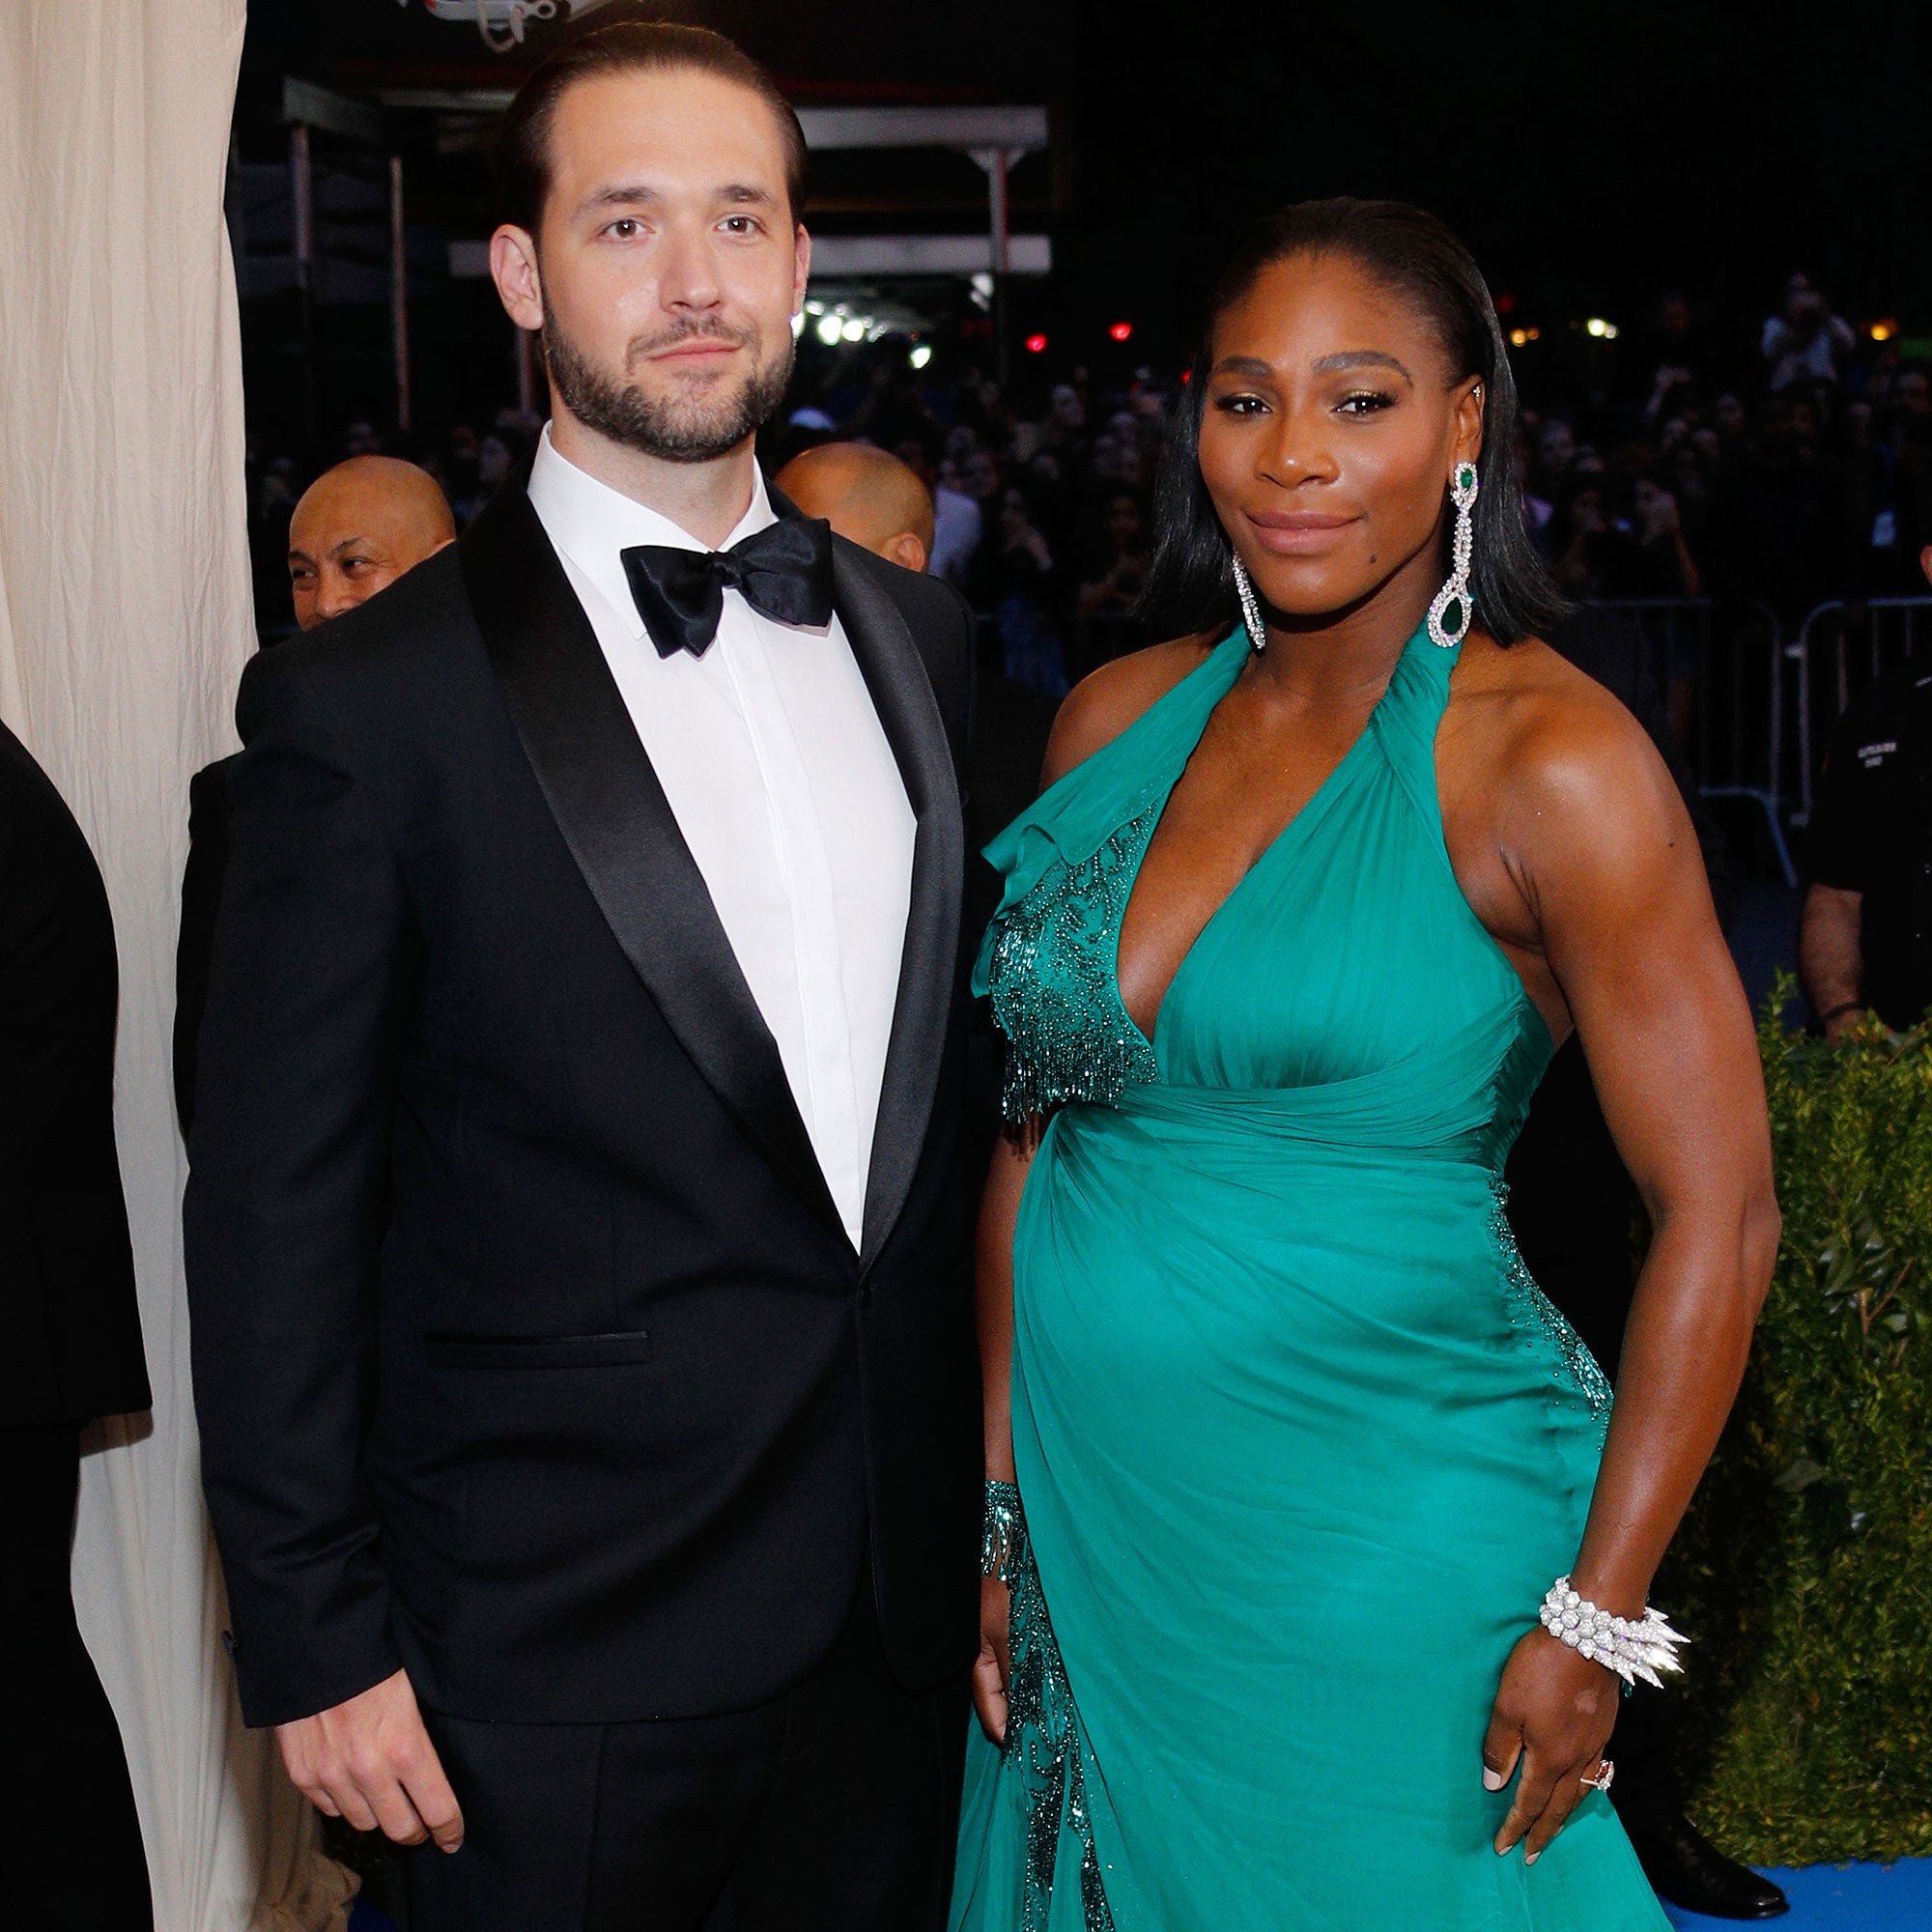 Pregnant Serena Williams' Fiance Alexis Ohanian Is Using His Own Site For Parenting Tips
